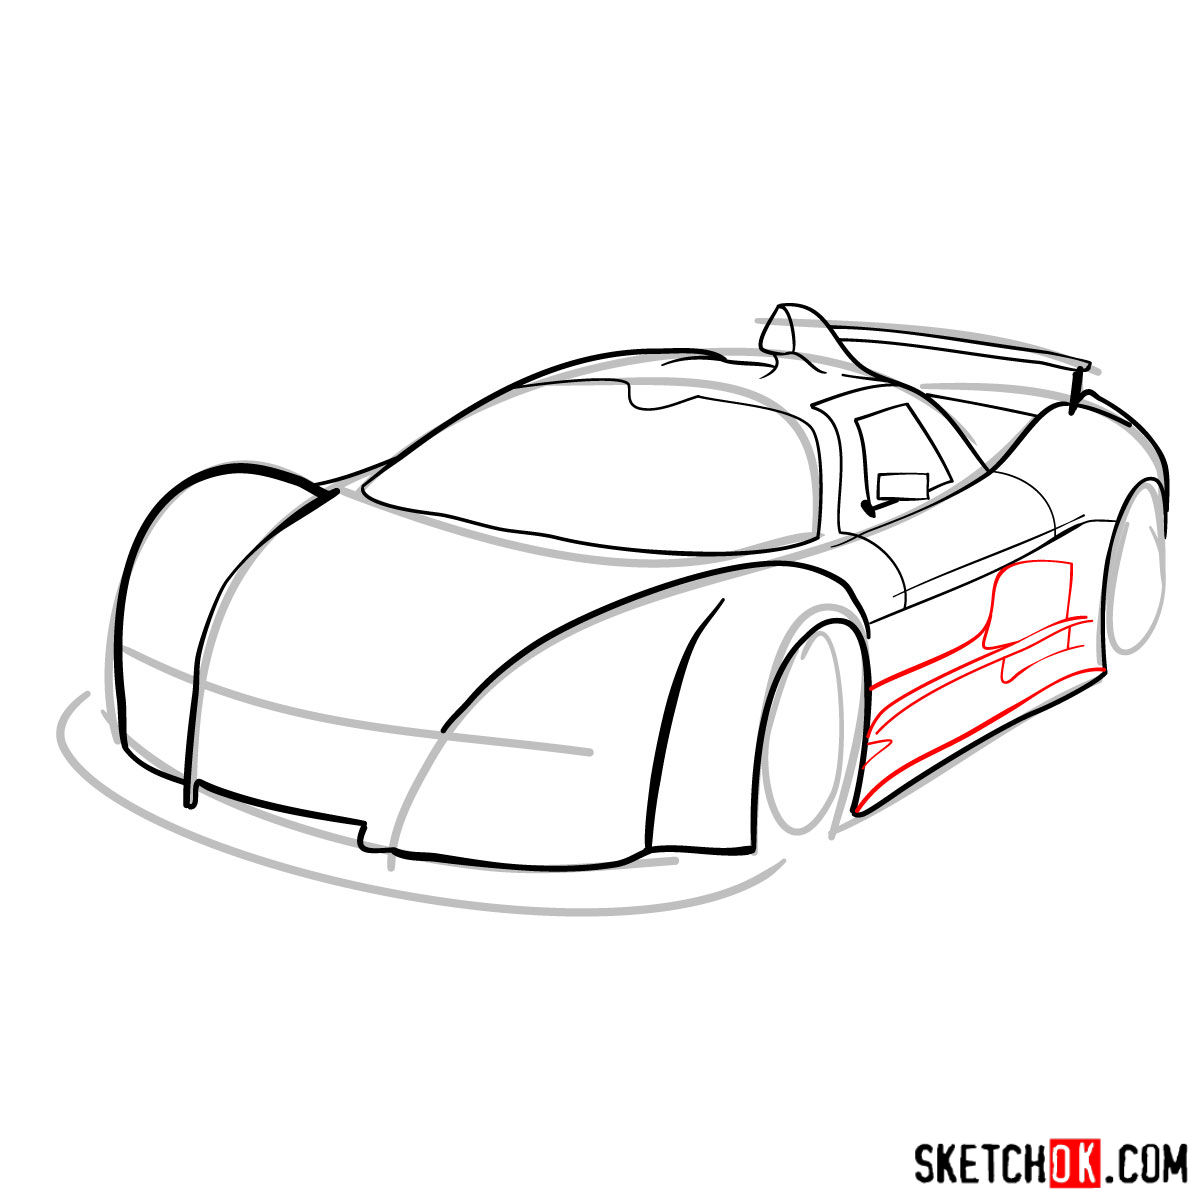 How to draw Gumpert Apolo Sport 2005 - step 07